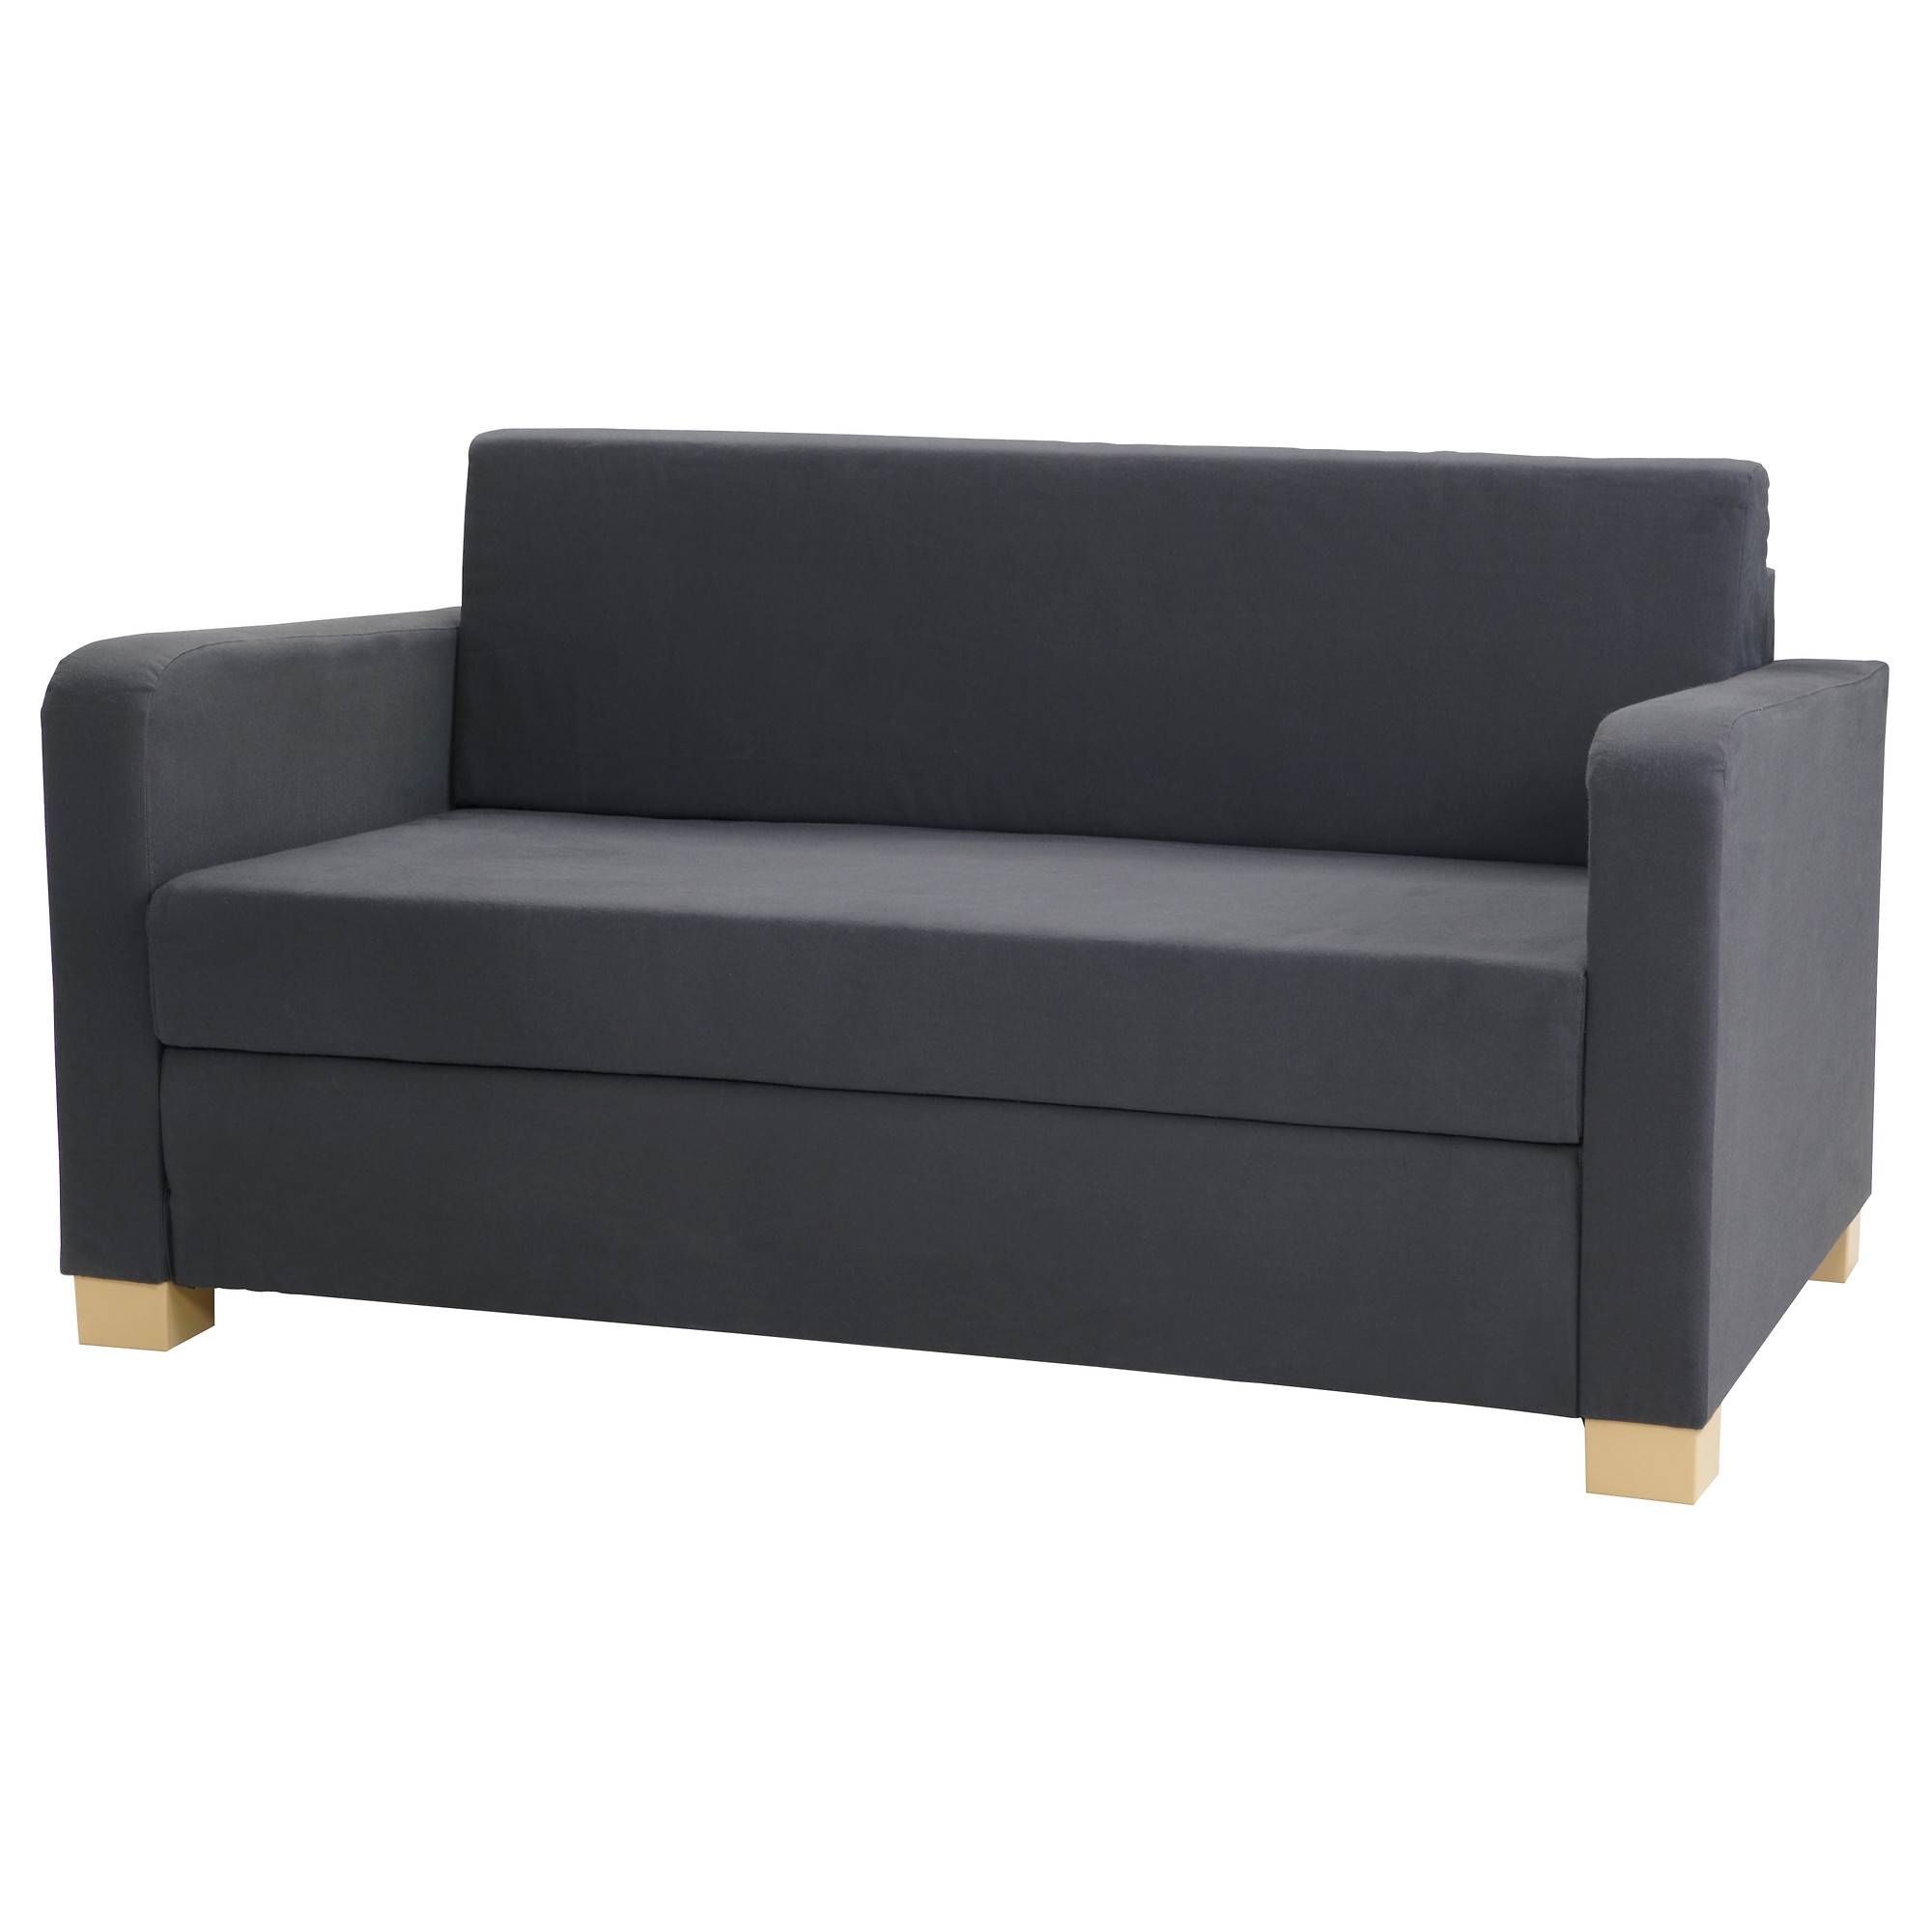 Sofa Beds & Futons – Ikea Intended For Sleeper Sofa Sectional Ikea (View 3 of 25)